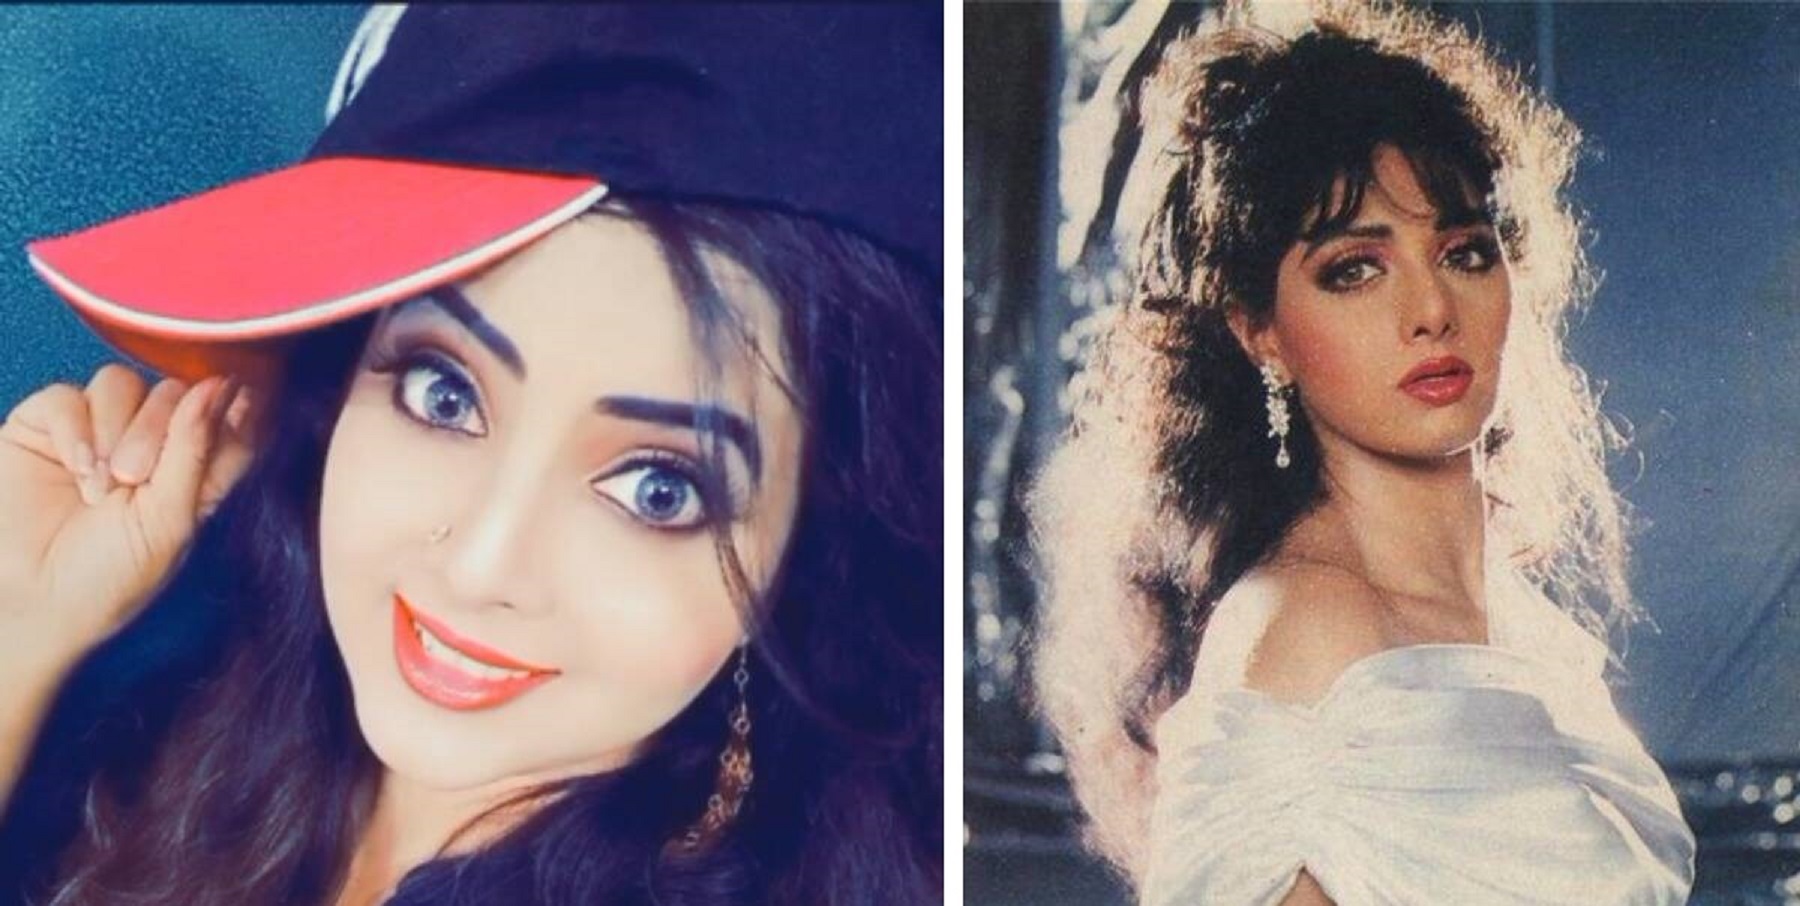 This Girl From Tik-Tok is Going Viral For Looking Like the Late Sridevi